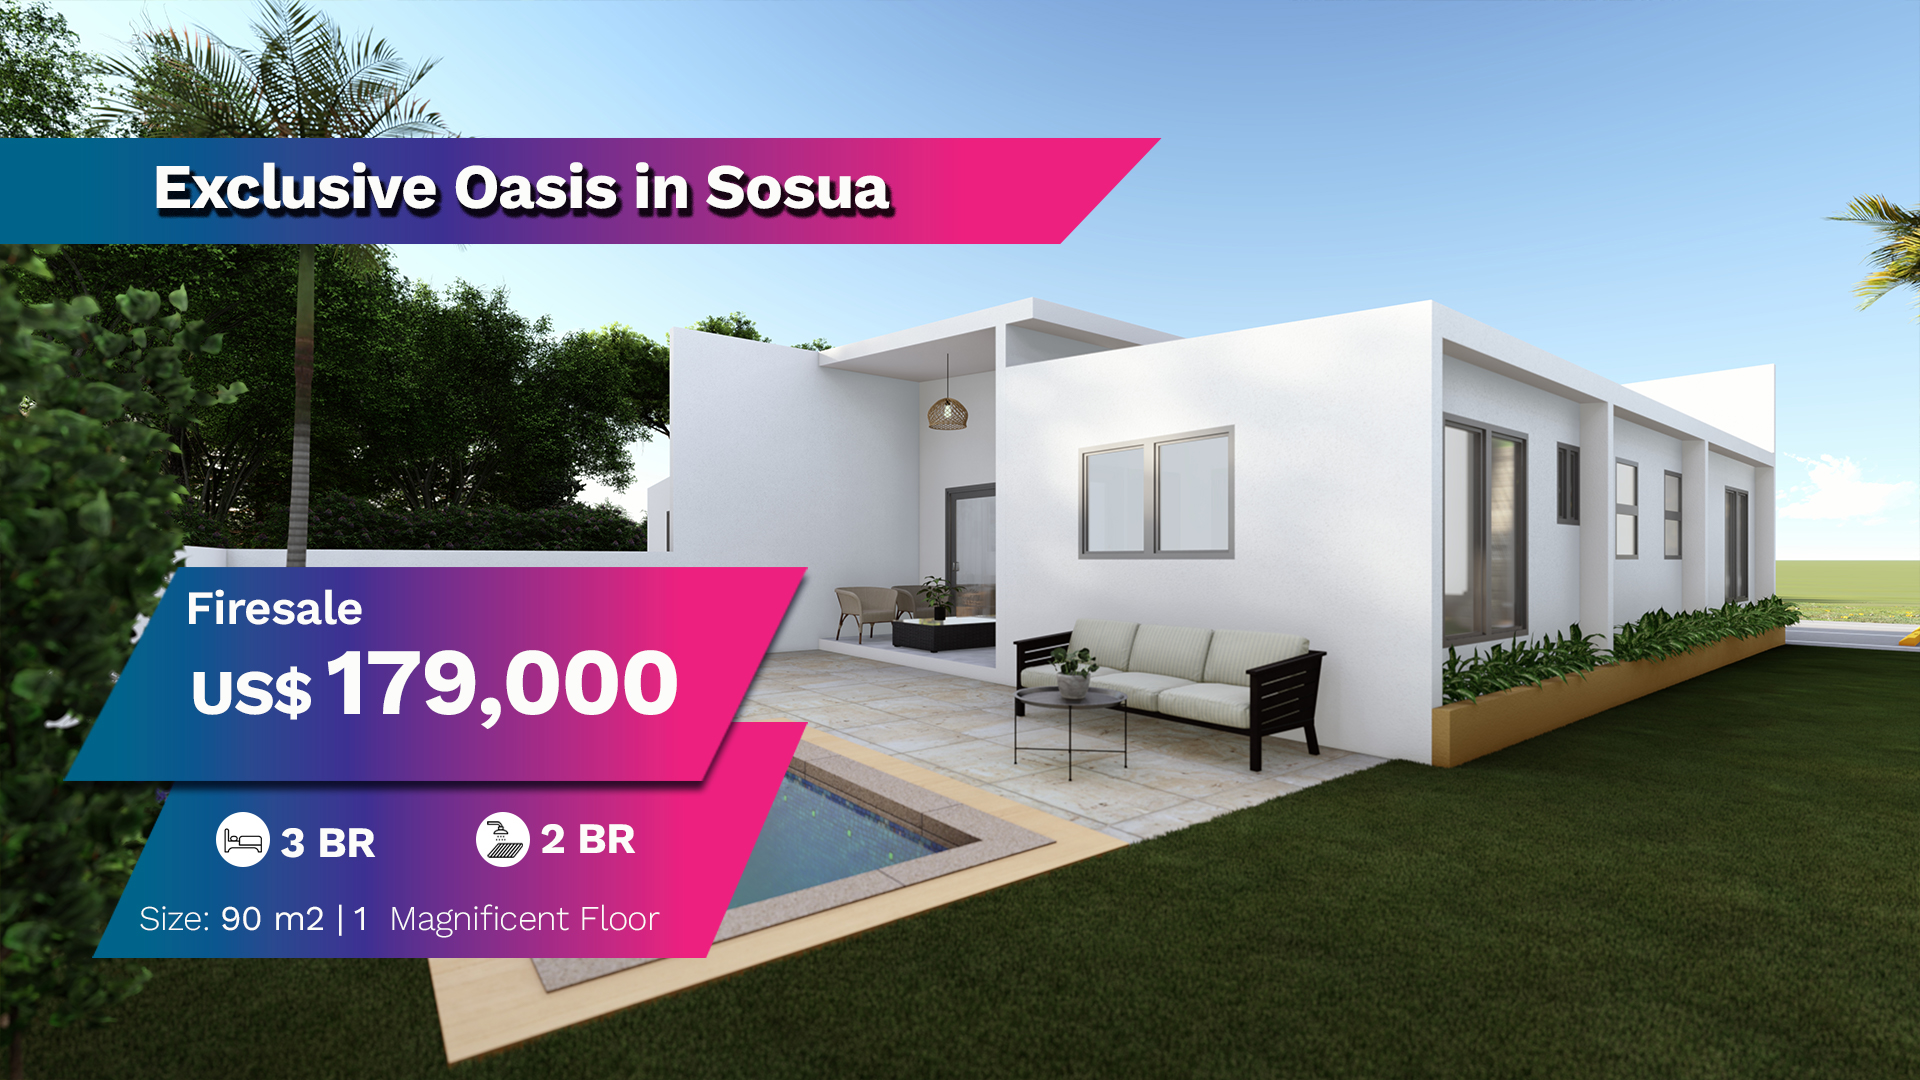 Exclusive Oasis in Sosua – Perfect for Airbnb!